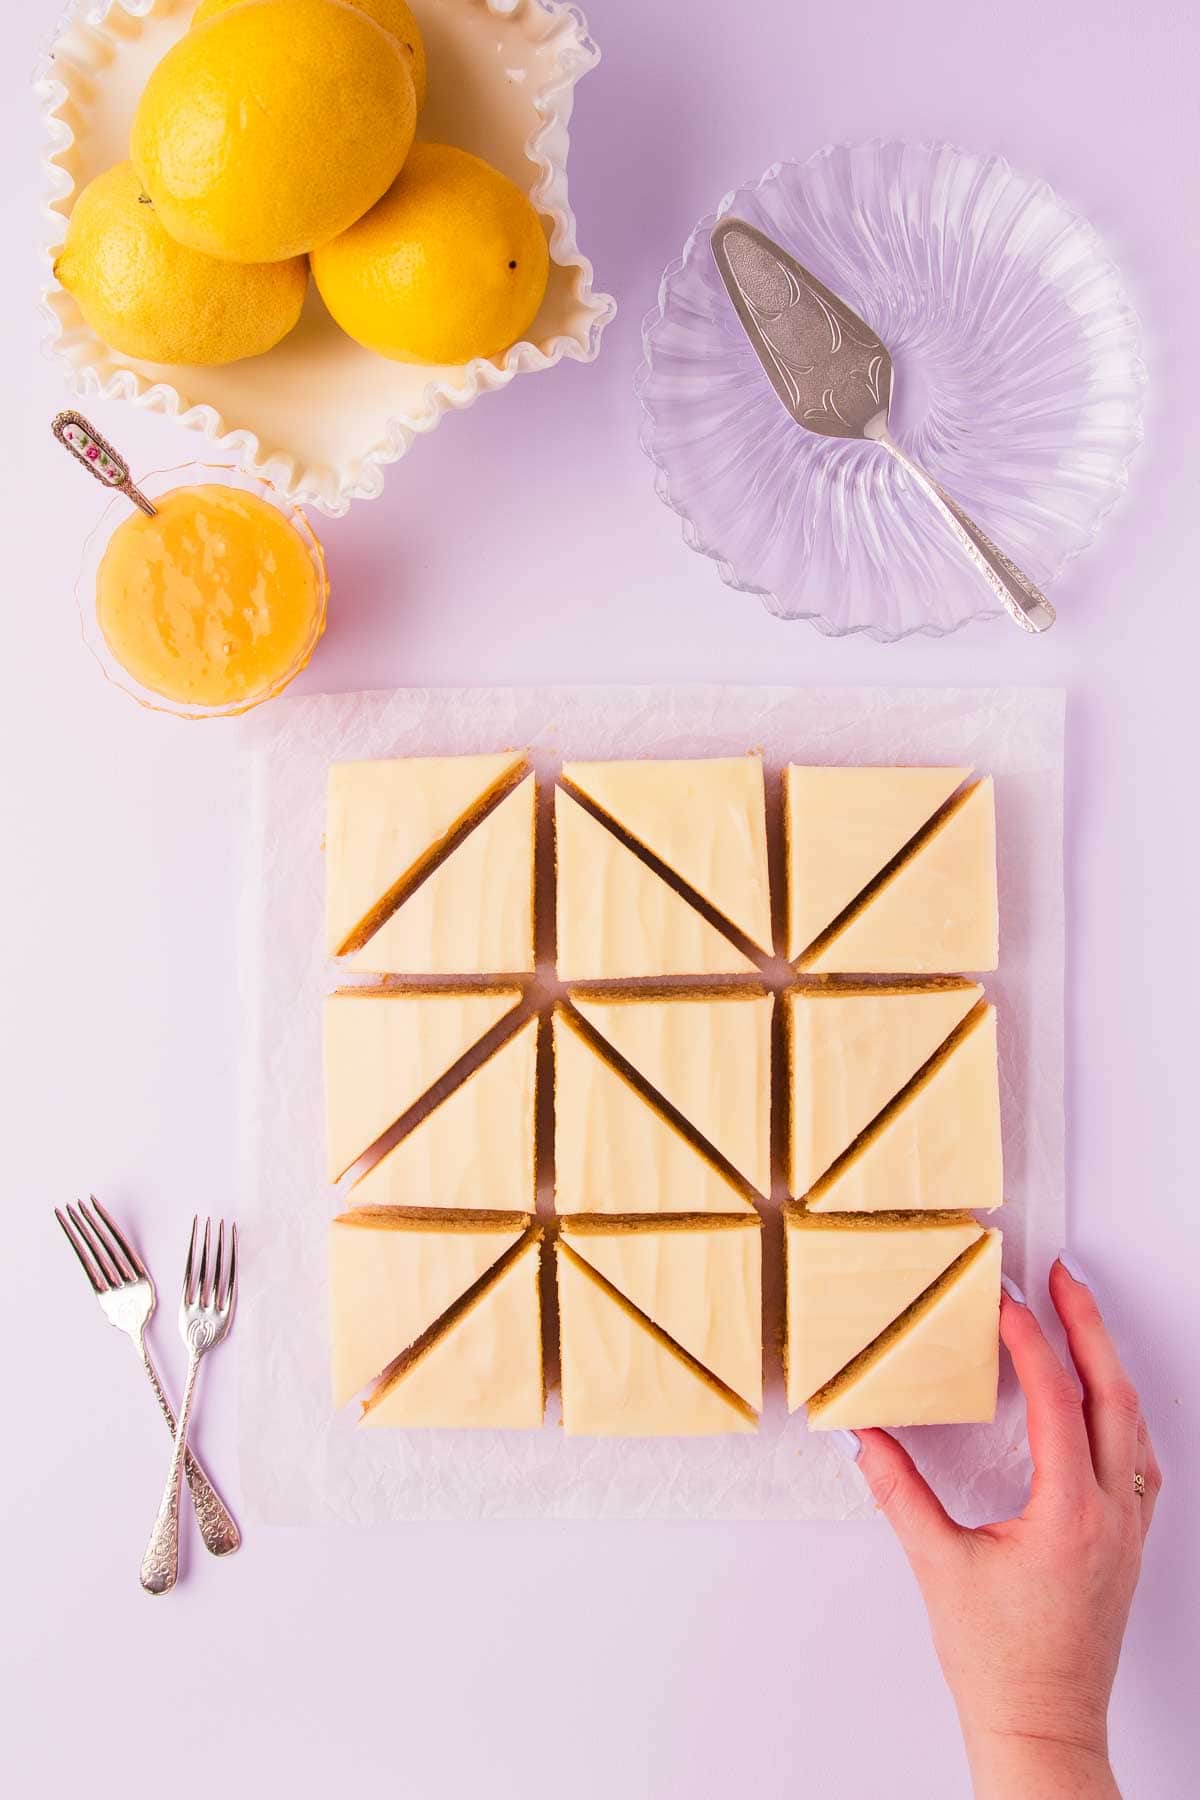 Lemon slice that has been cut into 16 triangle shaped pieces, on a light purple background, with a bowl of lemons, glass plates and cake forks. 